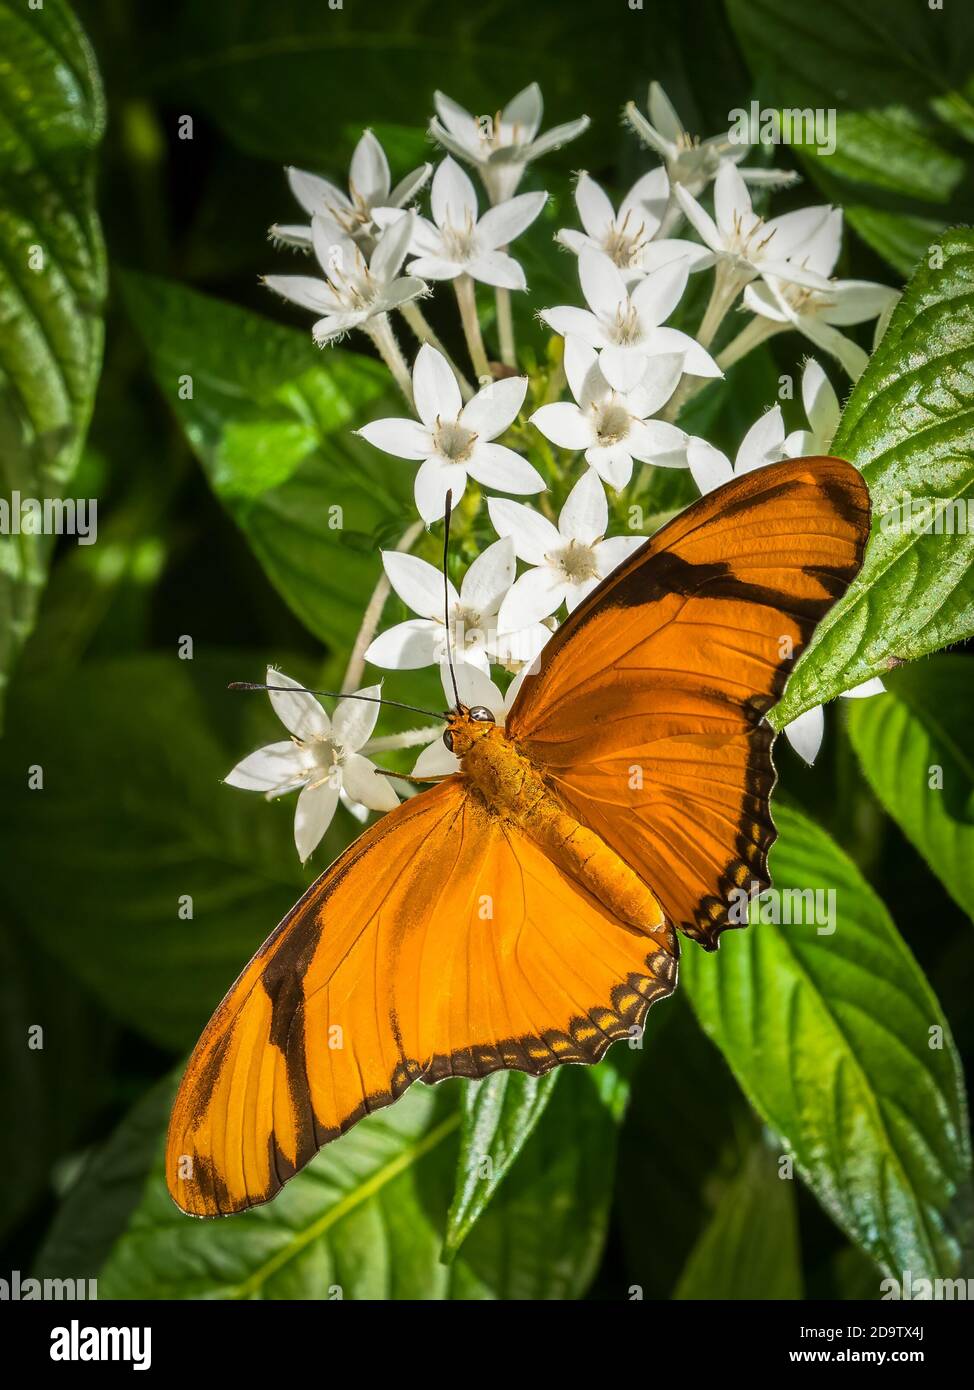 Close-up of an orange Julis Butterfly (Dryas iulia) on a white flower Stock Photo